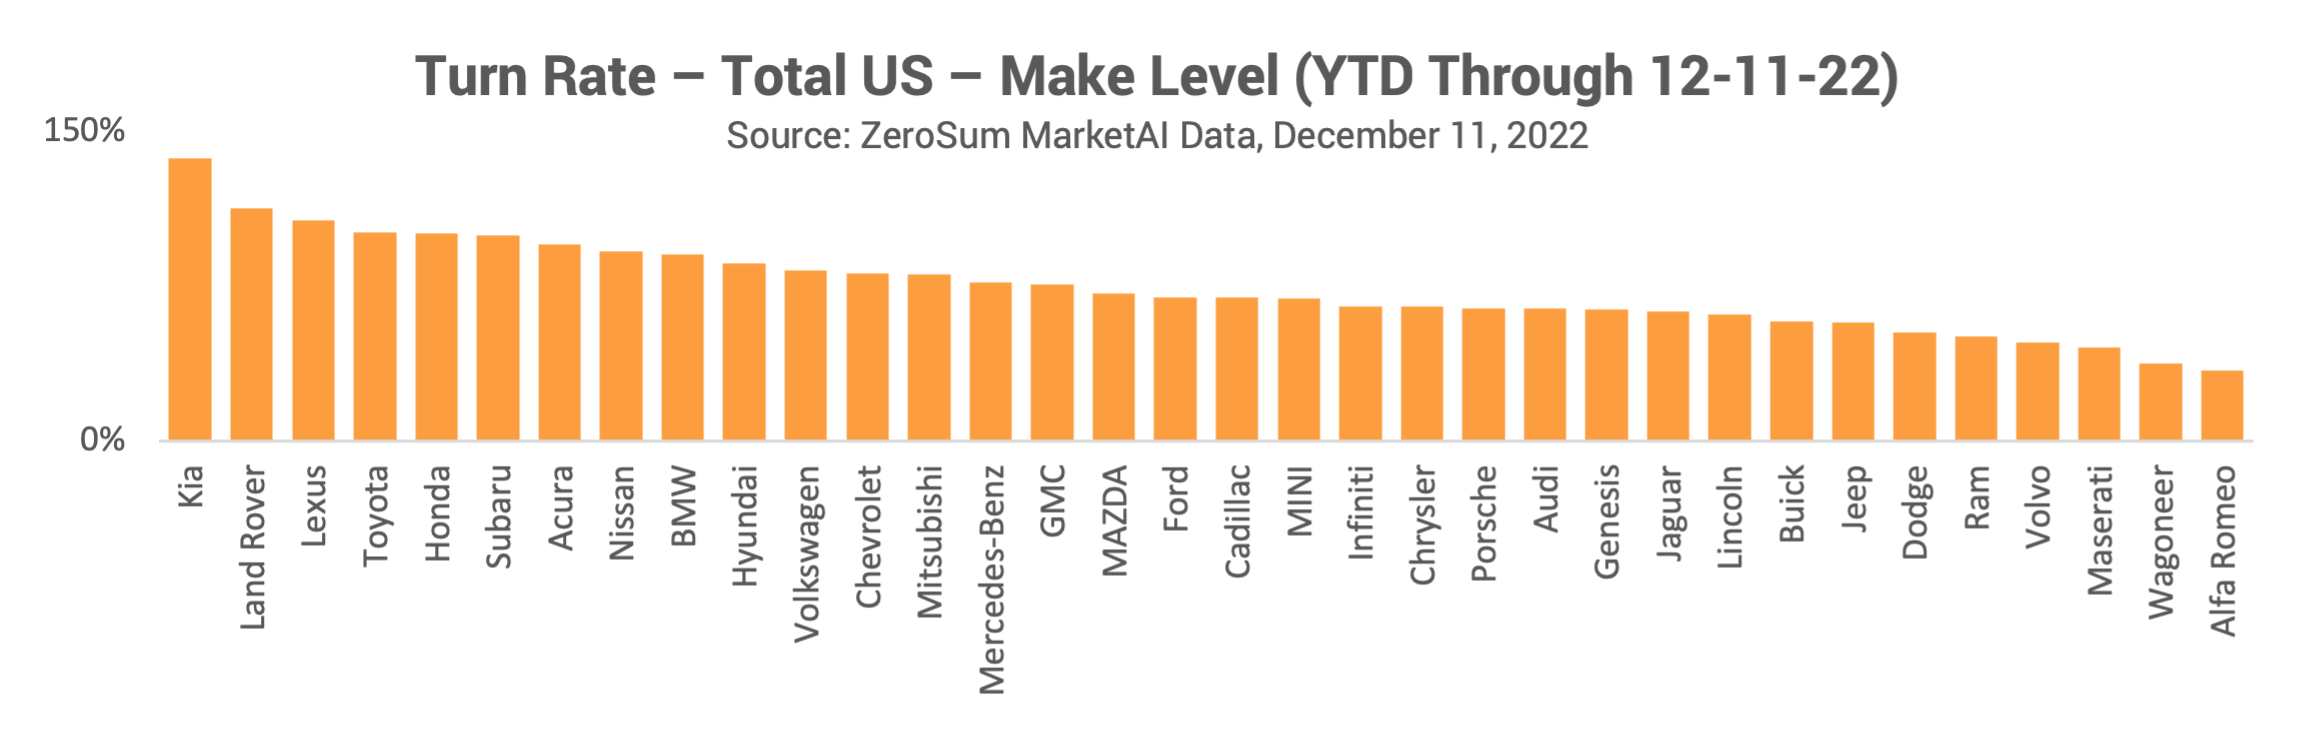 Turn Rate Total US Make Level